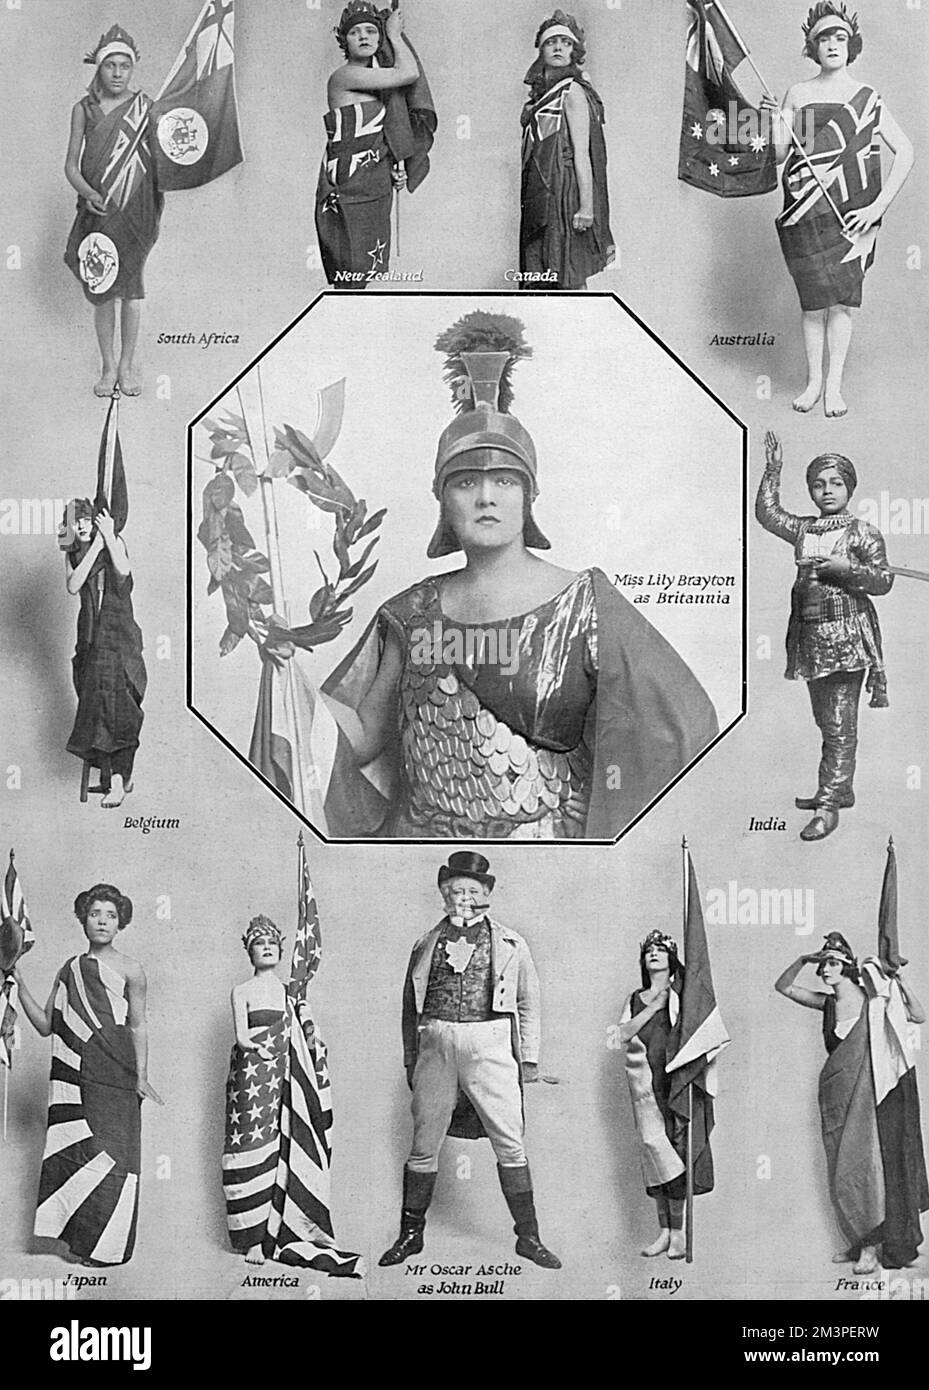 The cast of the First World War hit West End revue show, Chu Chin Chow, dressed in costume for an additional scene which had been a feature of the show since Armistice Night - with members dressed up to represent various different Allied countries.  The stars of the show, Oscar Asche and his wife, Lily Brayton, are dressed up as John Bull and Britainnia respectively.       Date: 1918 Stock Photo